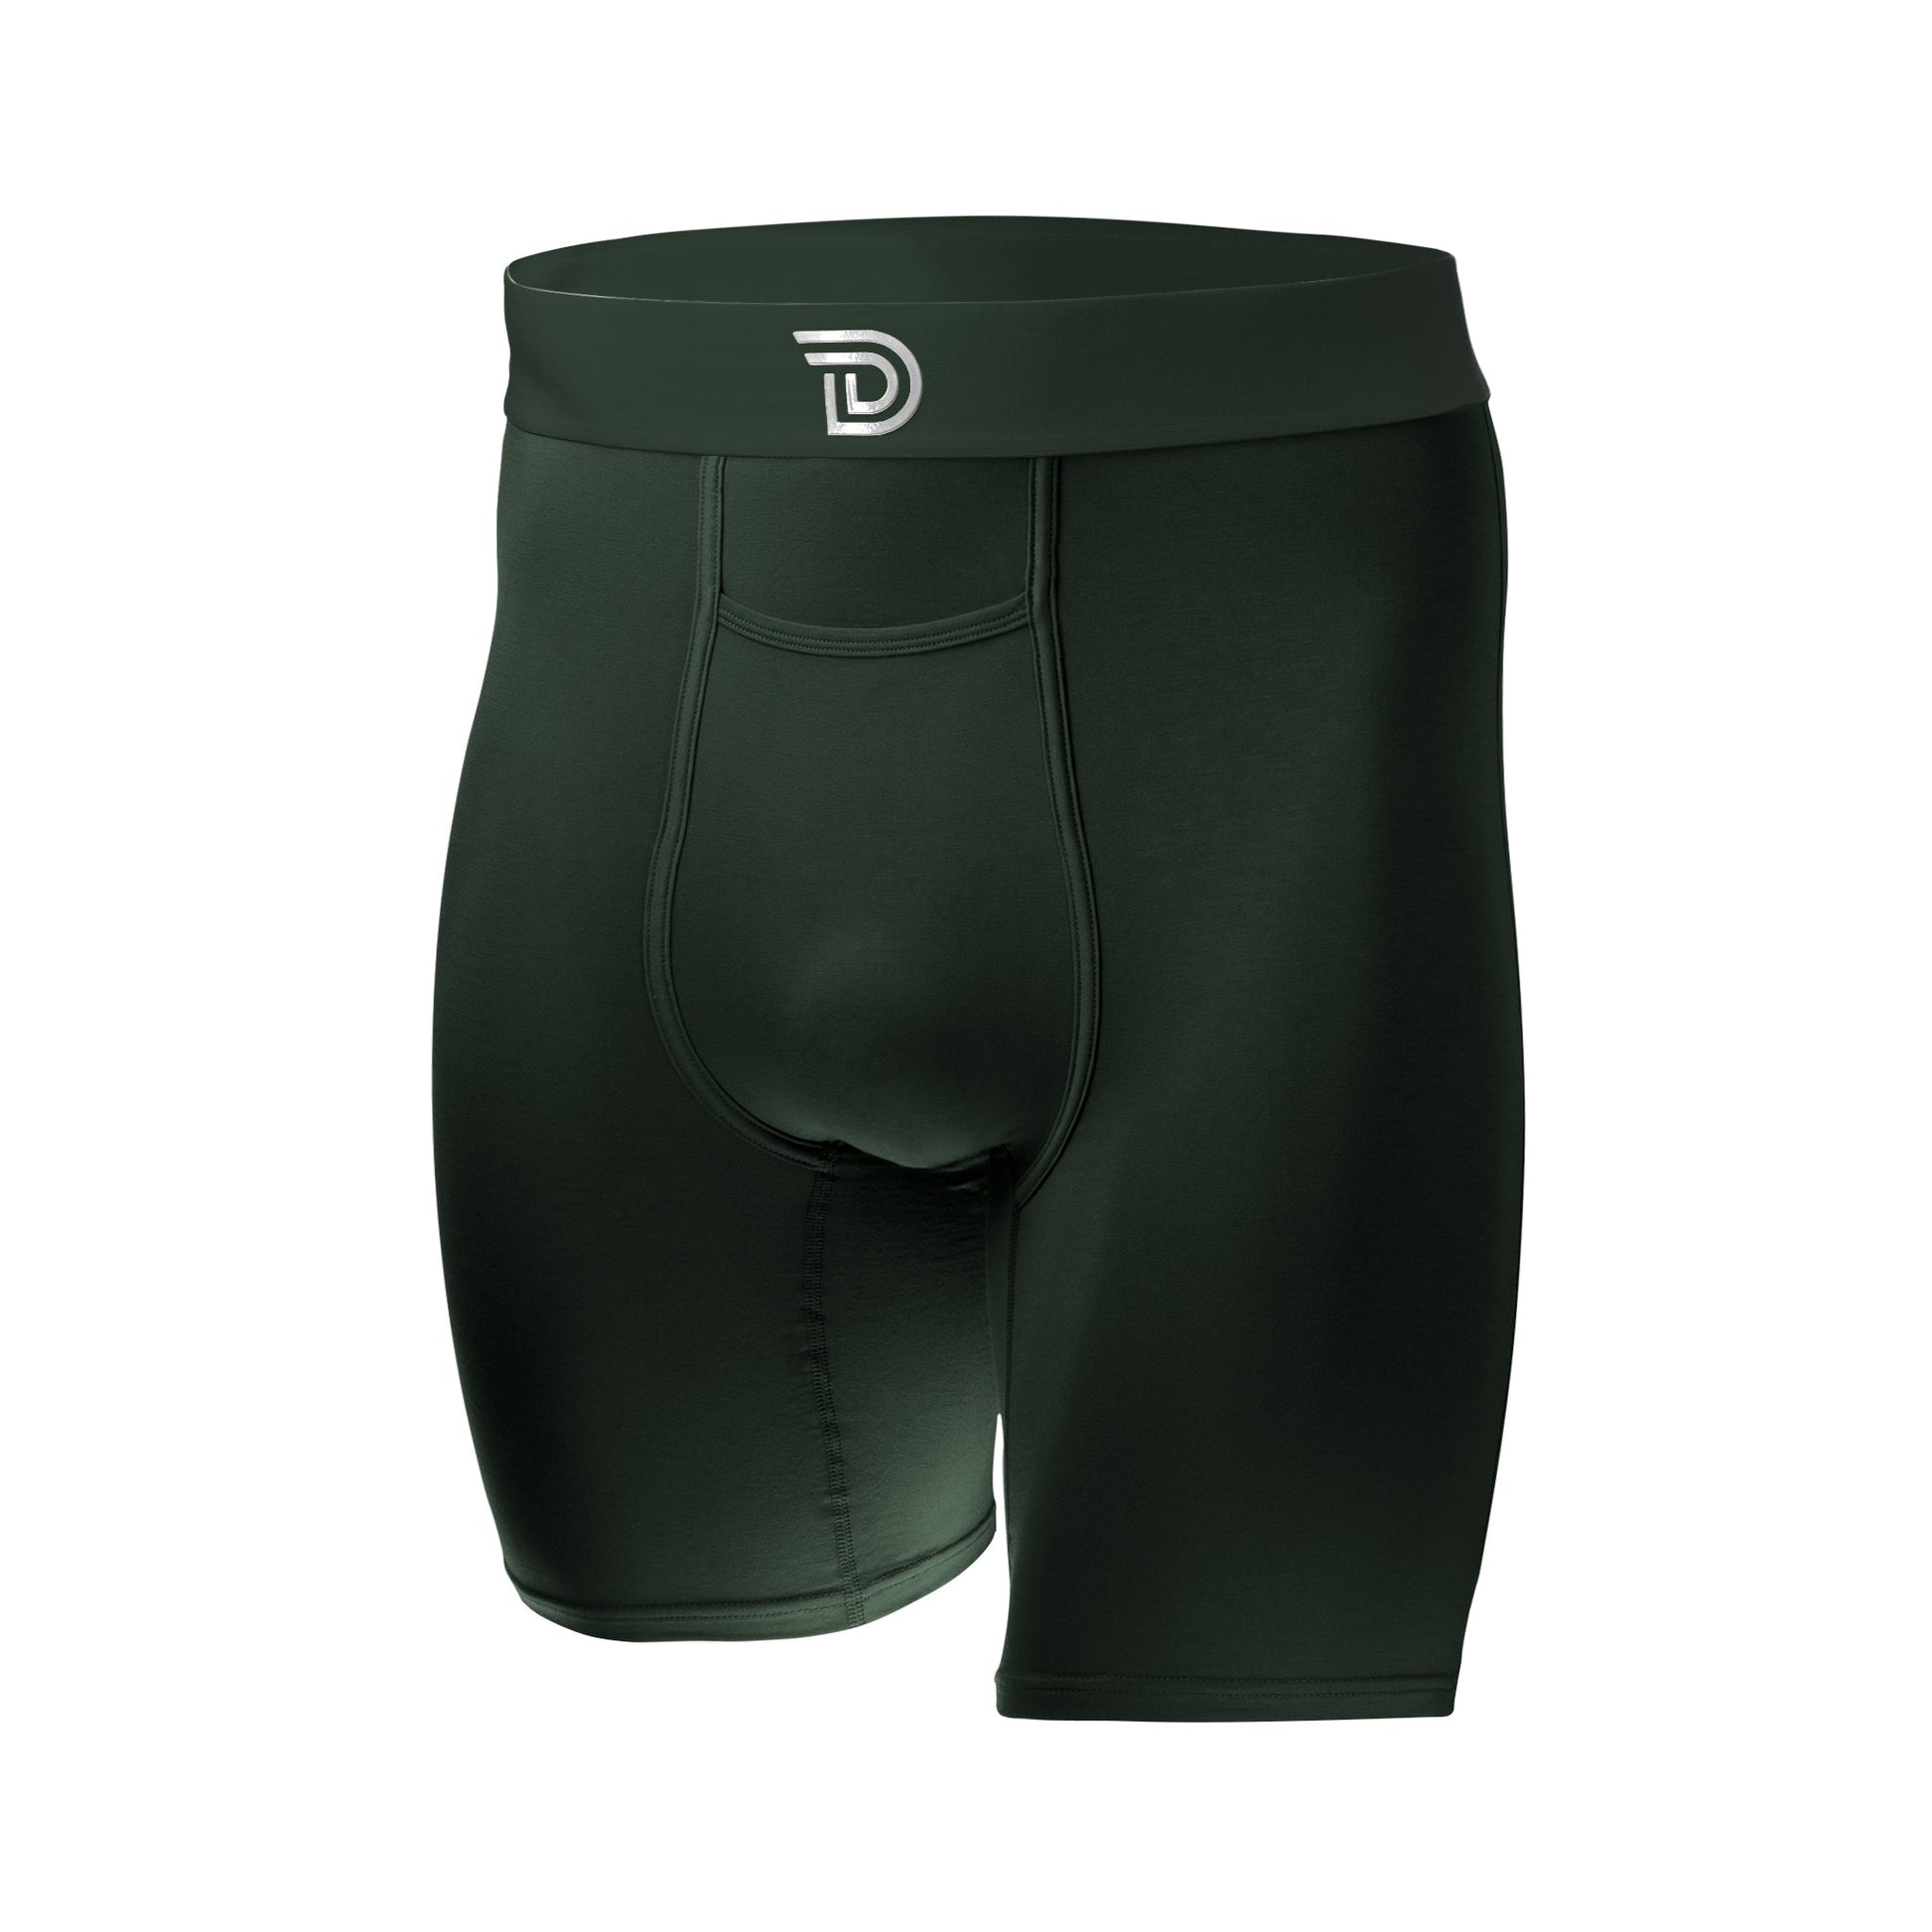 Recycle Green Mens NDS Wear Briefs Underwear by TooLoud